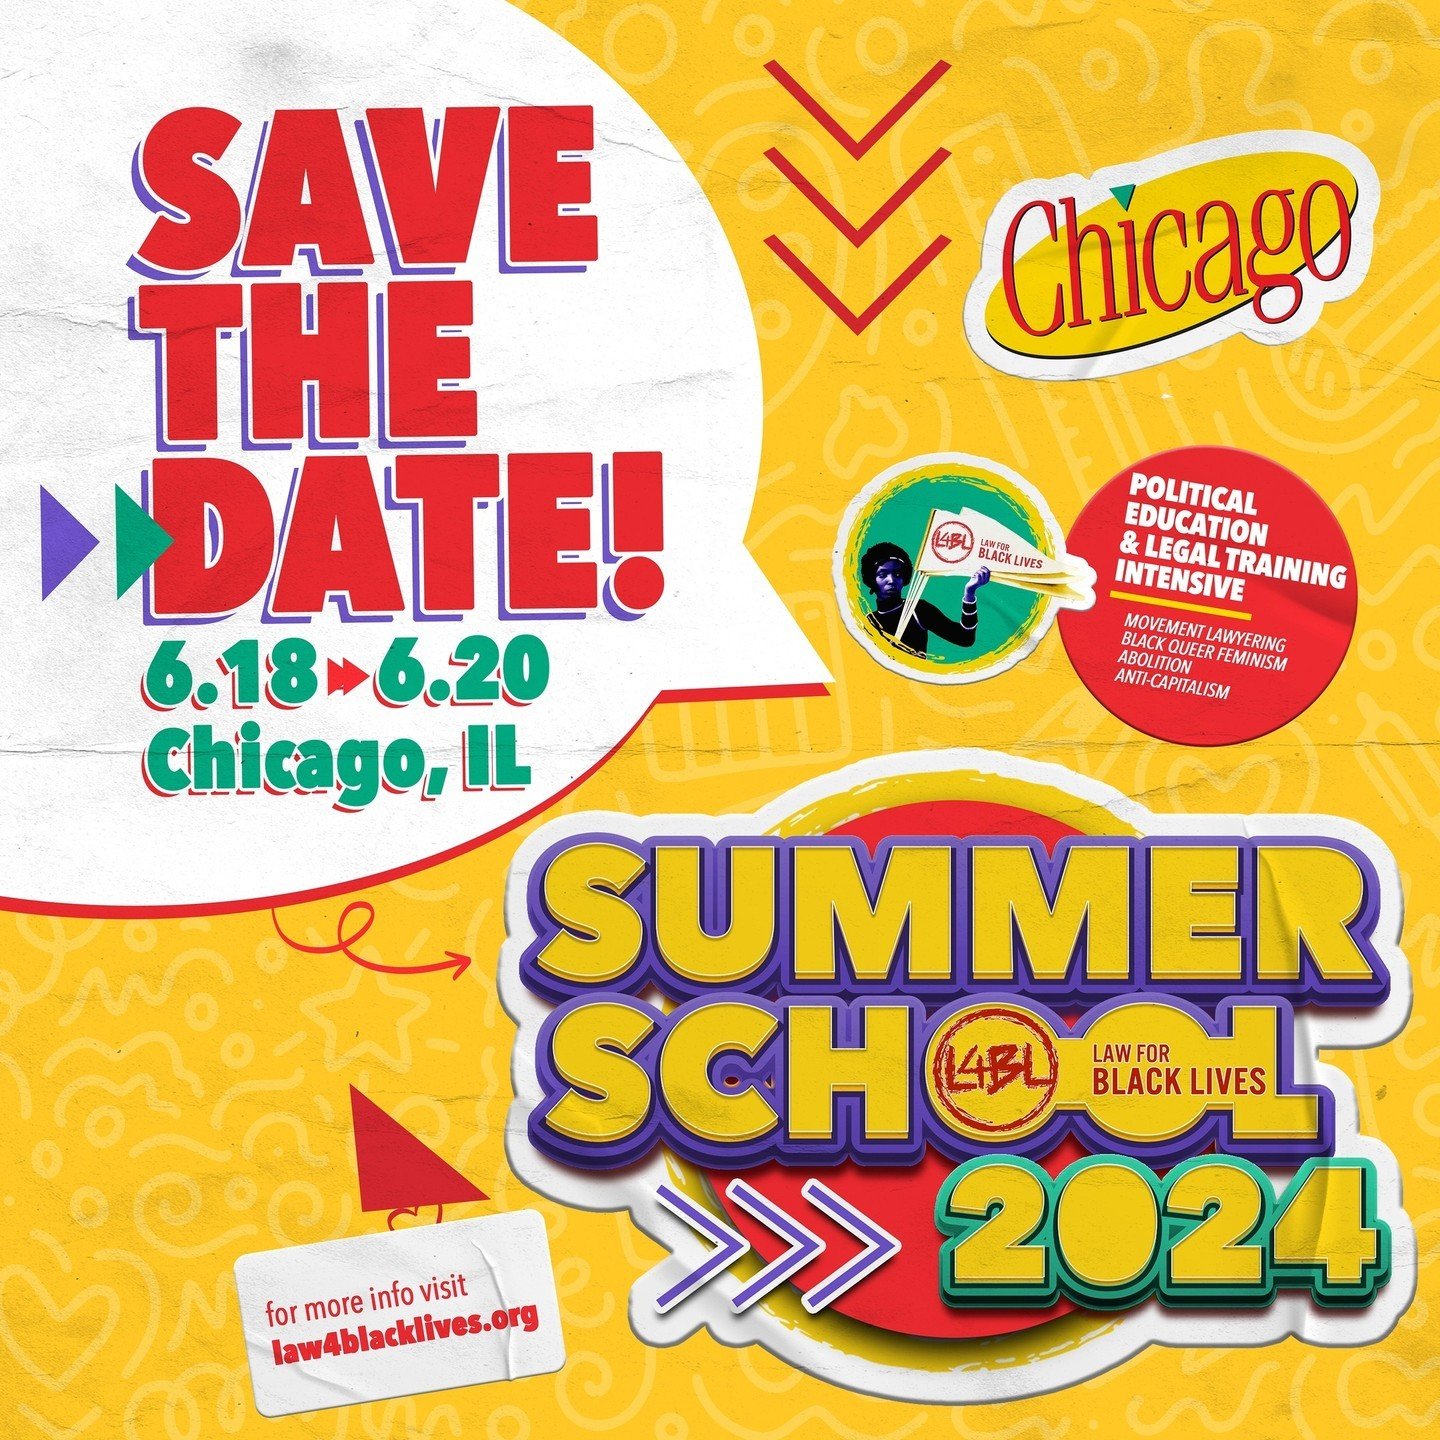 Ready to challenge your legal understanding and help advance a radical, grassroots, Black agenda? Our immersive summer program arrives in Chicago this June 18th-20th, offering a unique opportunity for face-to-face community building. Our program offe